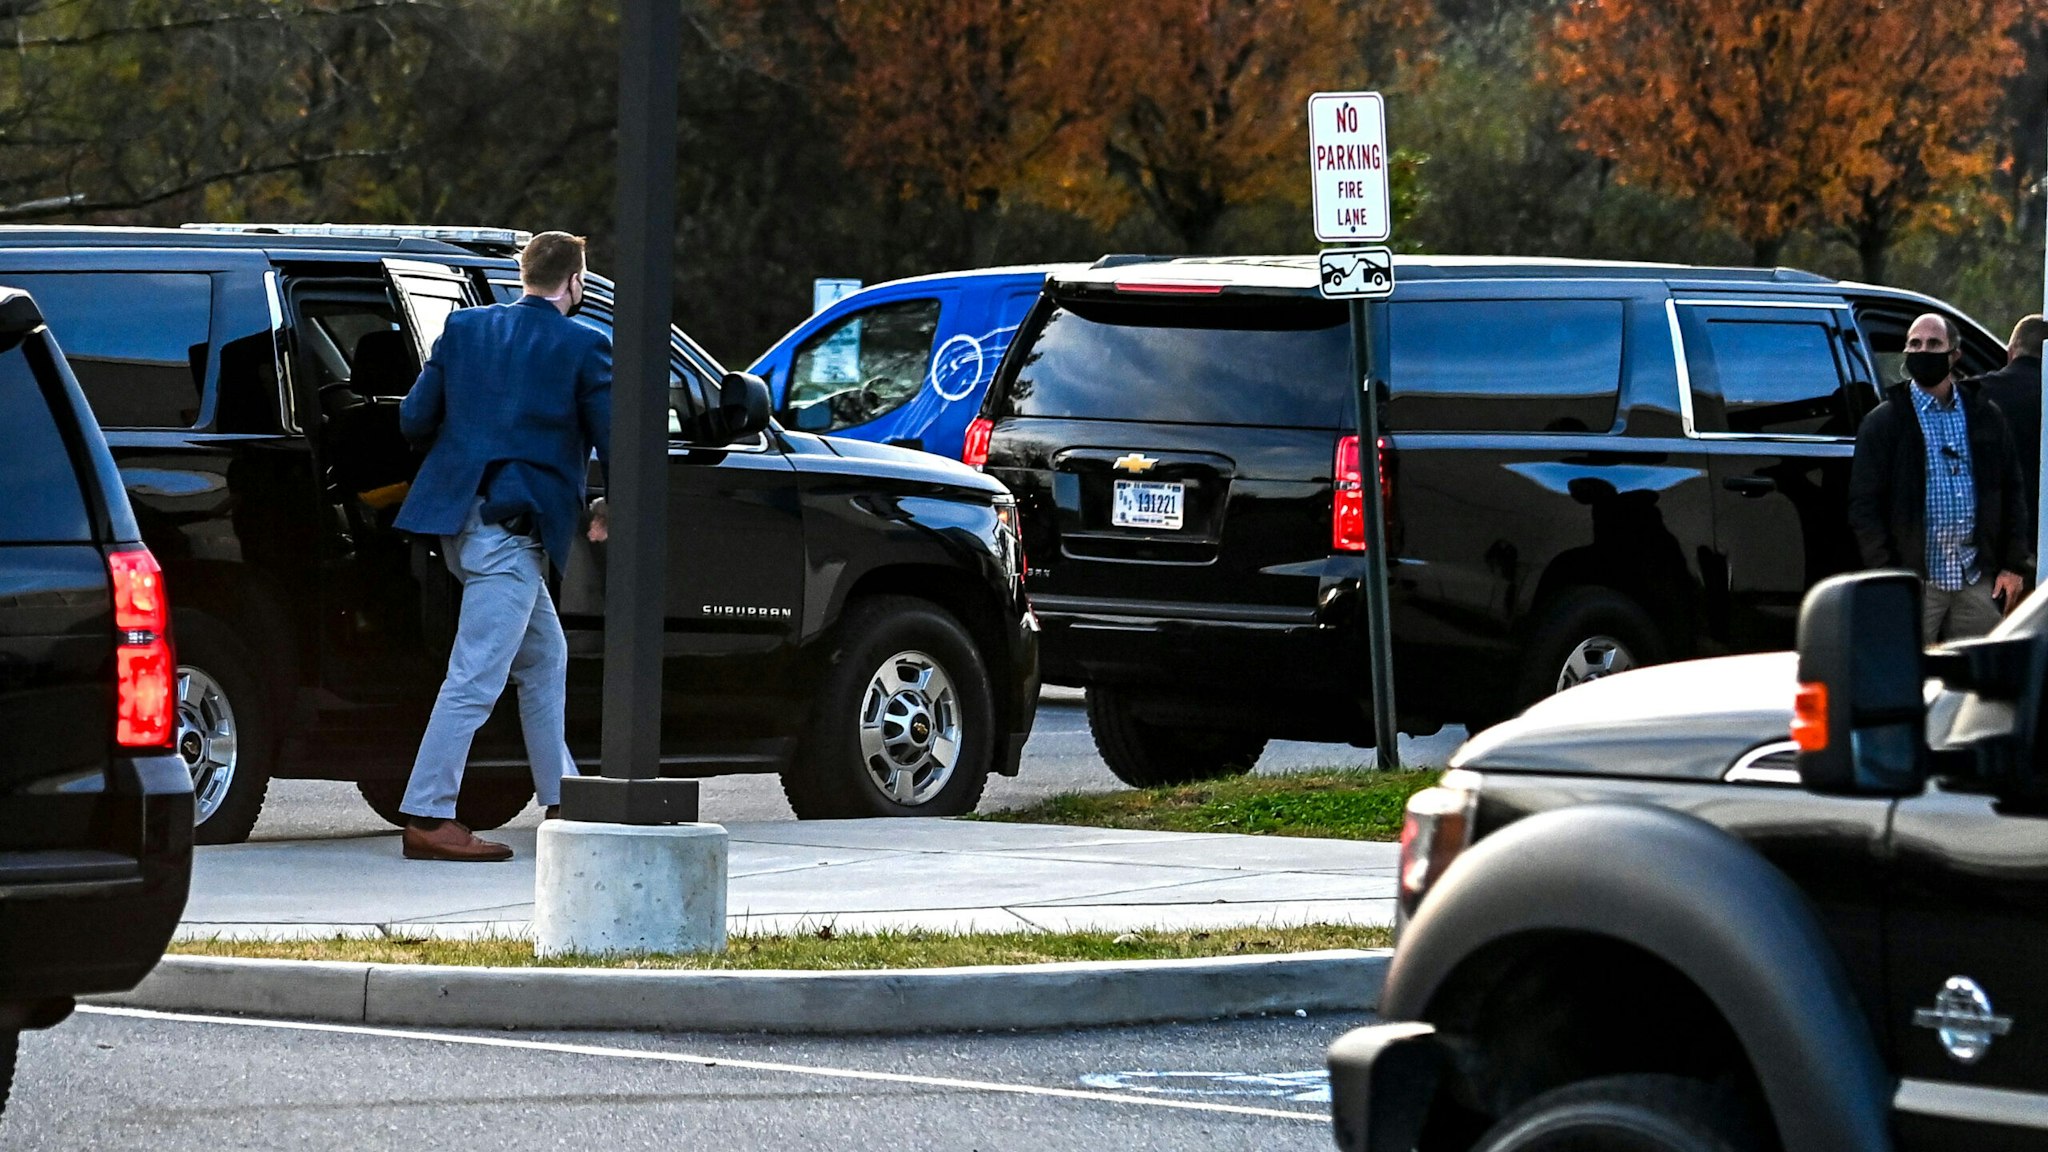 A vehicle carrying US President-elect Joe Biden arrives at Delaware Orthopaedic Specialists Clinic in Newark, Delaware, on November 29, 2020. - On November 28,2020 President-elect Biden slipped while playing with his dog Major, and twisted his ankle. Out of an abundance of caution, he will be examined this afternoon by an orthopaedist. (